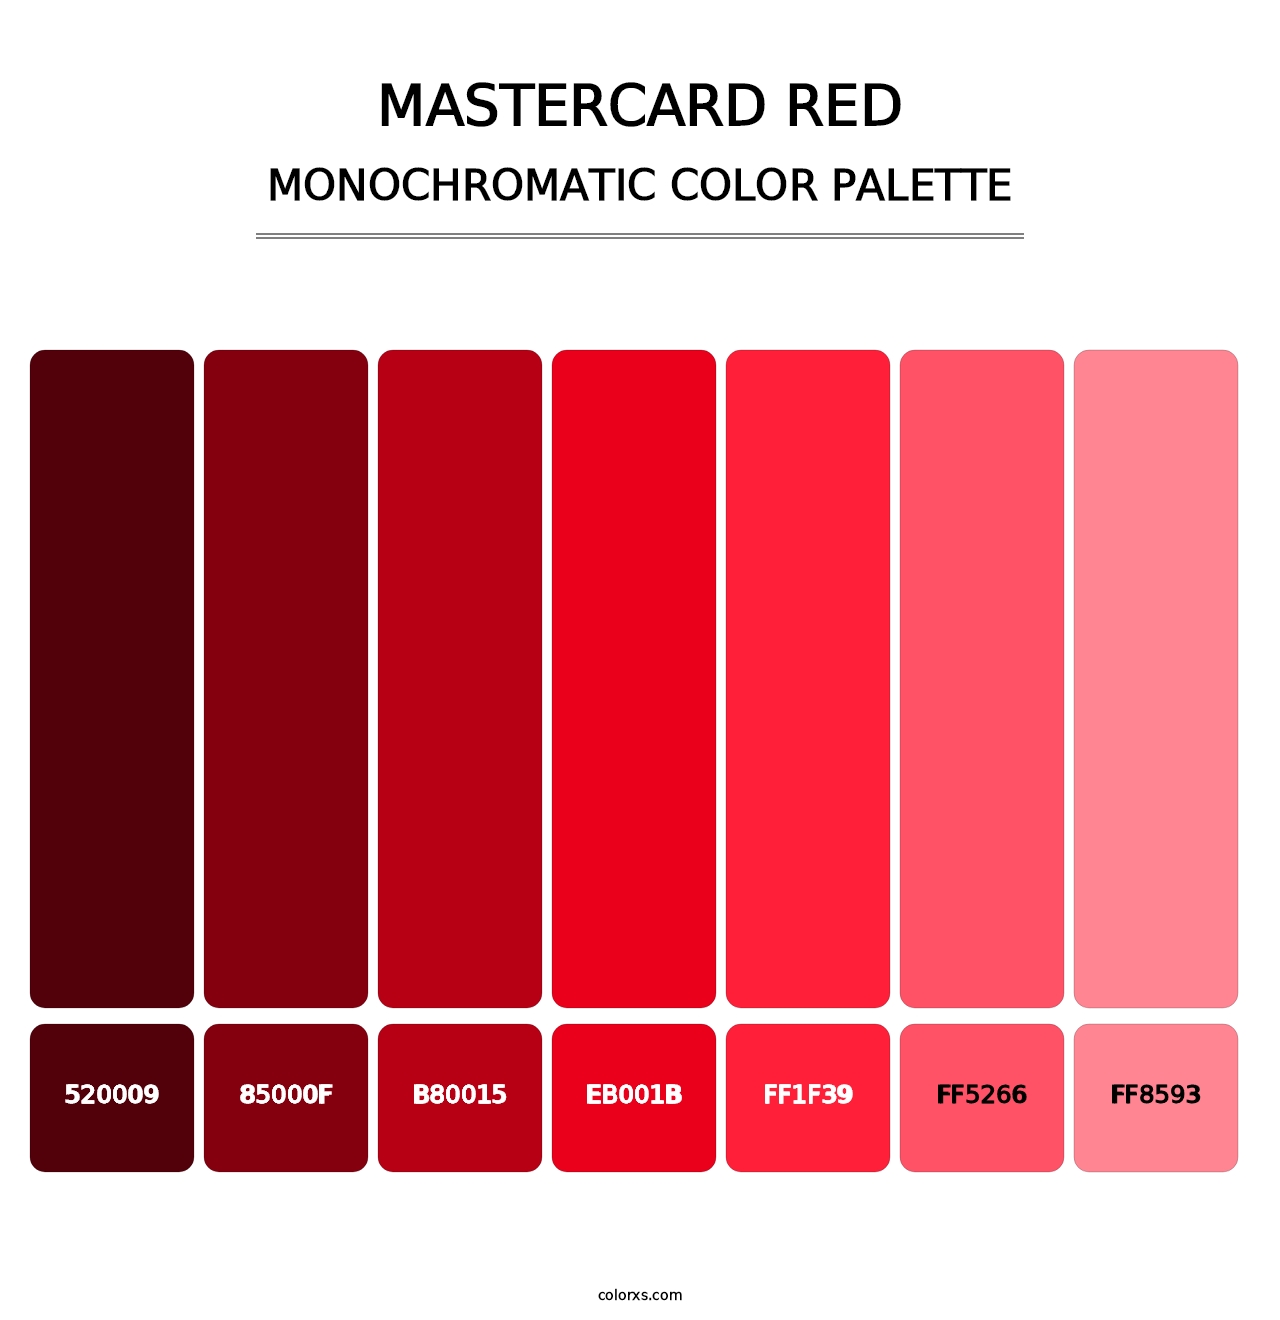 Mastercard Red - Monochromatic Color Palette